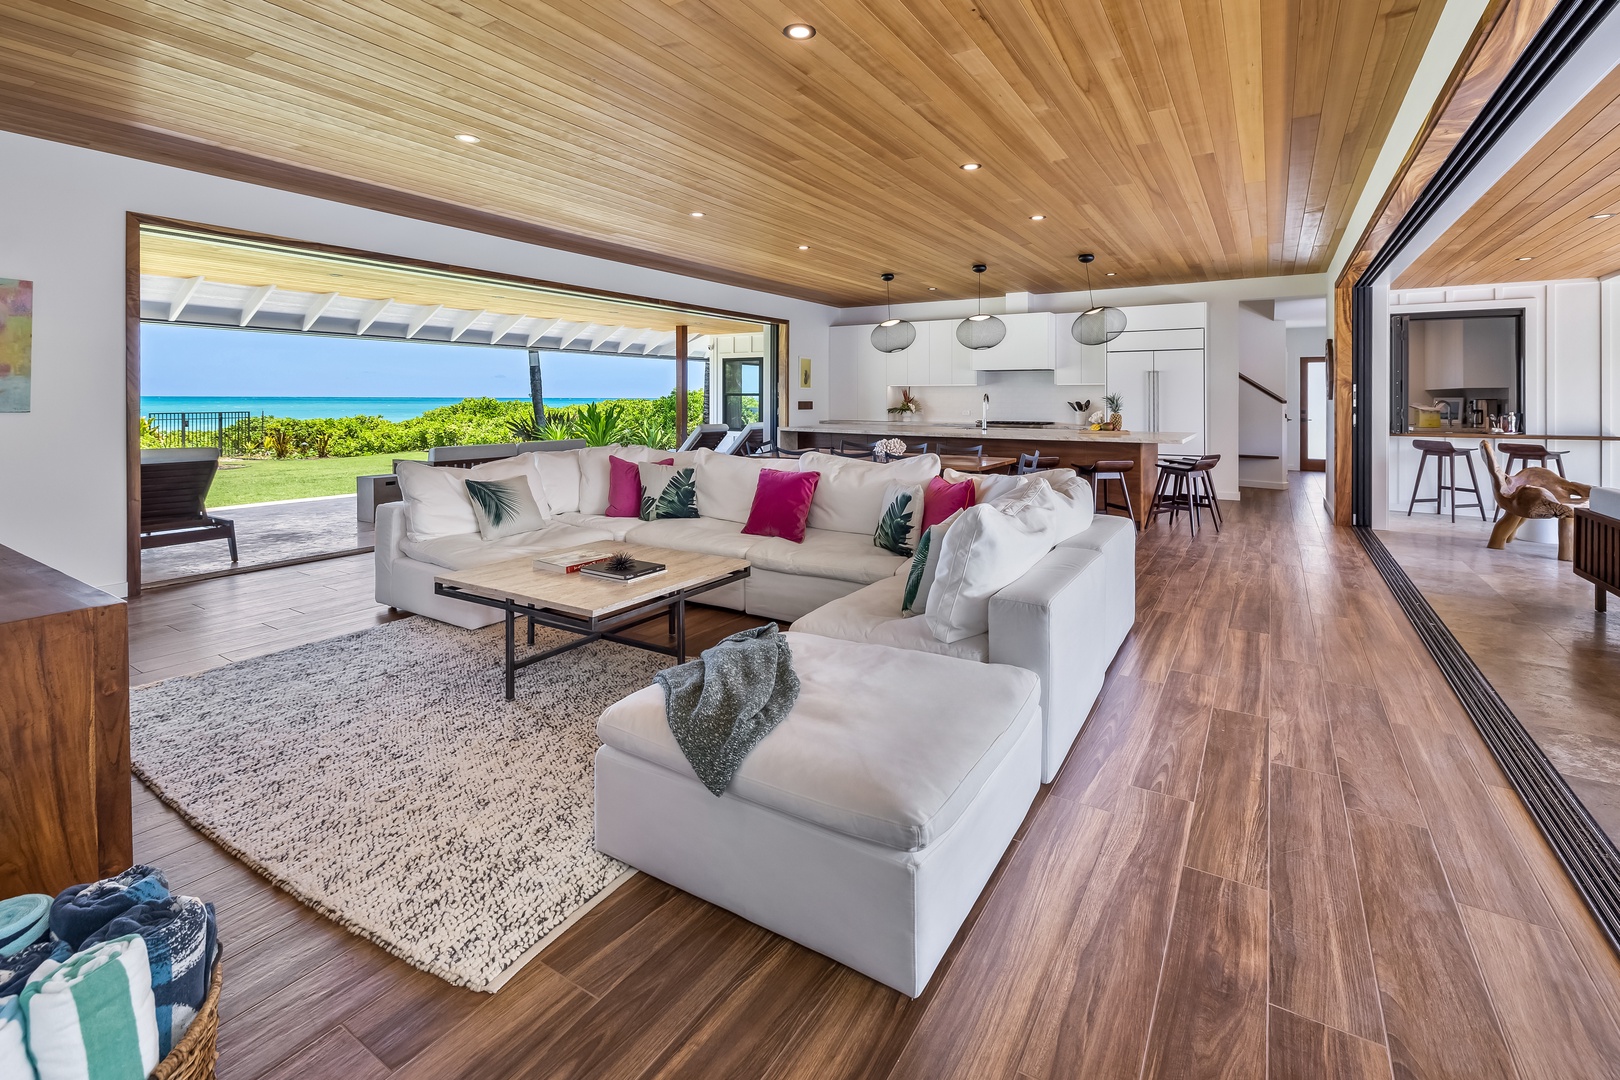 Kailua Vacation Rentals, Kailua Beach Villa - Seamless flow from the kitchen to dining and living spaces, perfect for entertaining and relaxation.